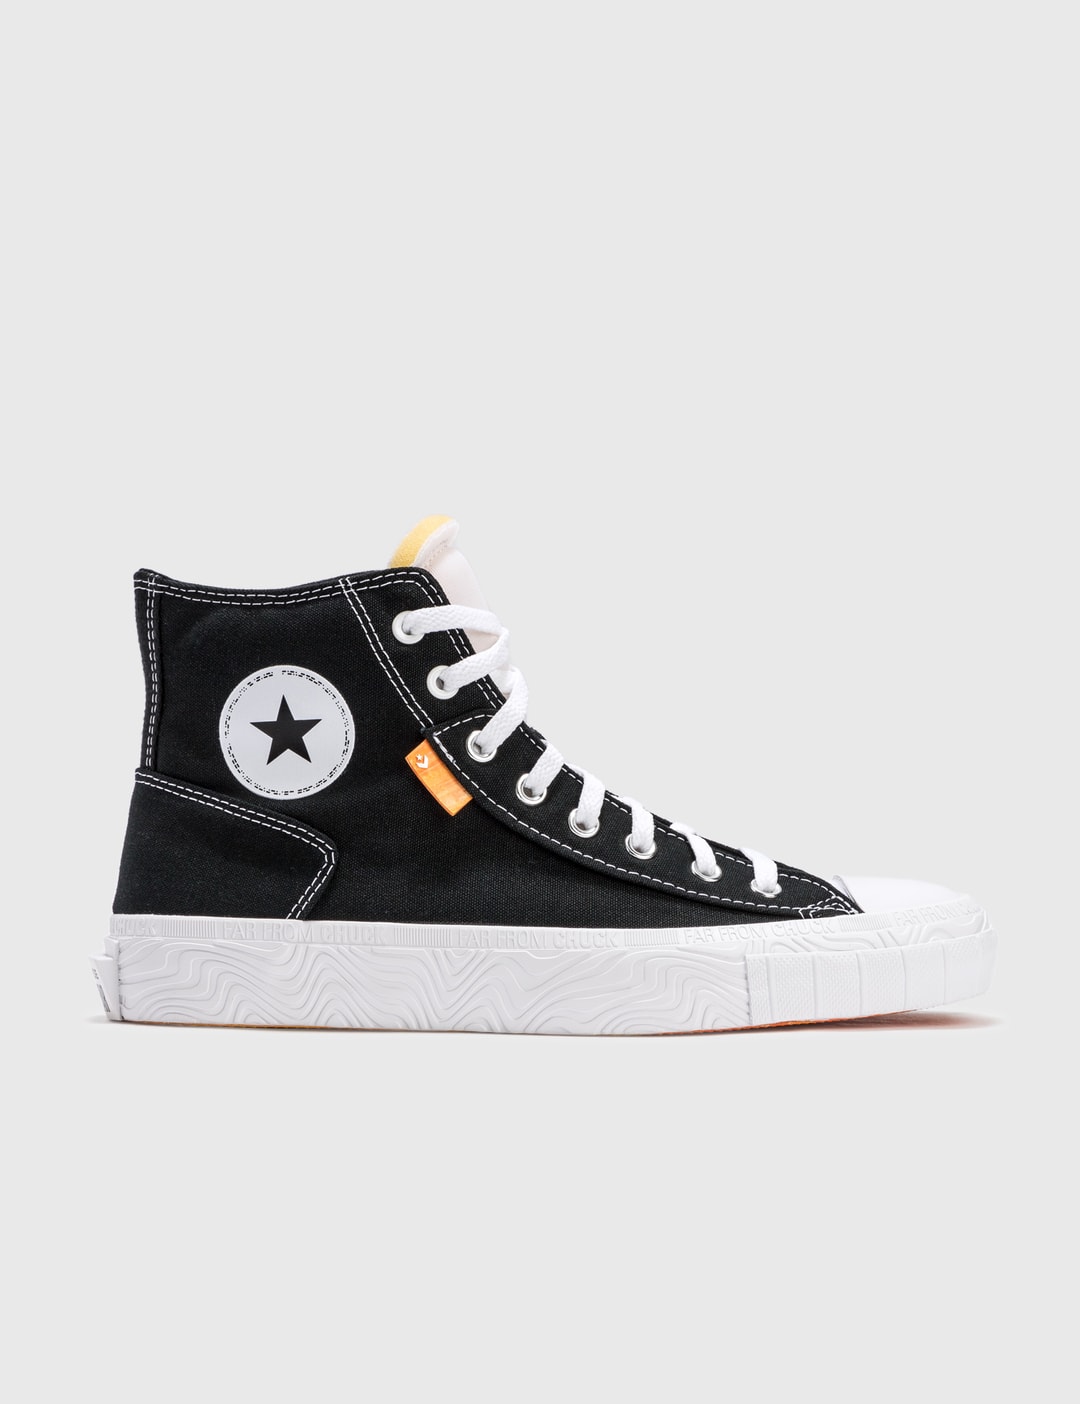 sokken architect Ongedaan maken Converse - Alt Exploration Chuck Taylor All Star | HBX - Globally Curated  Fashion and Lifestyle by Hypebeast